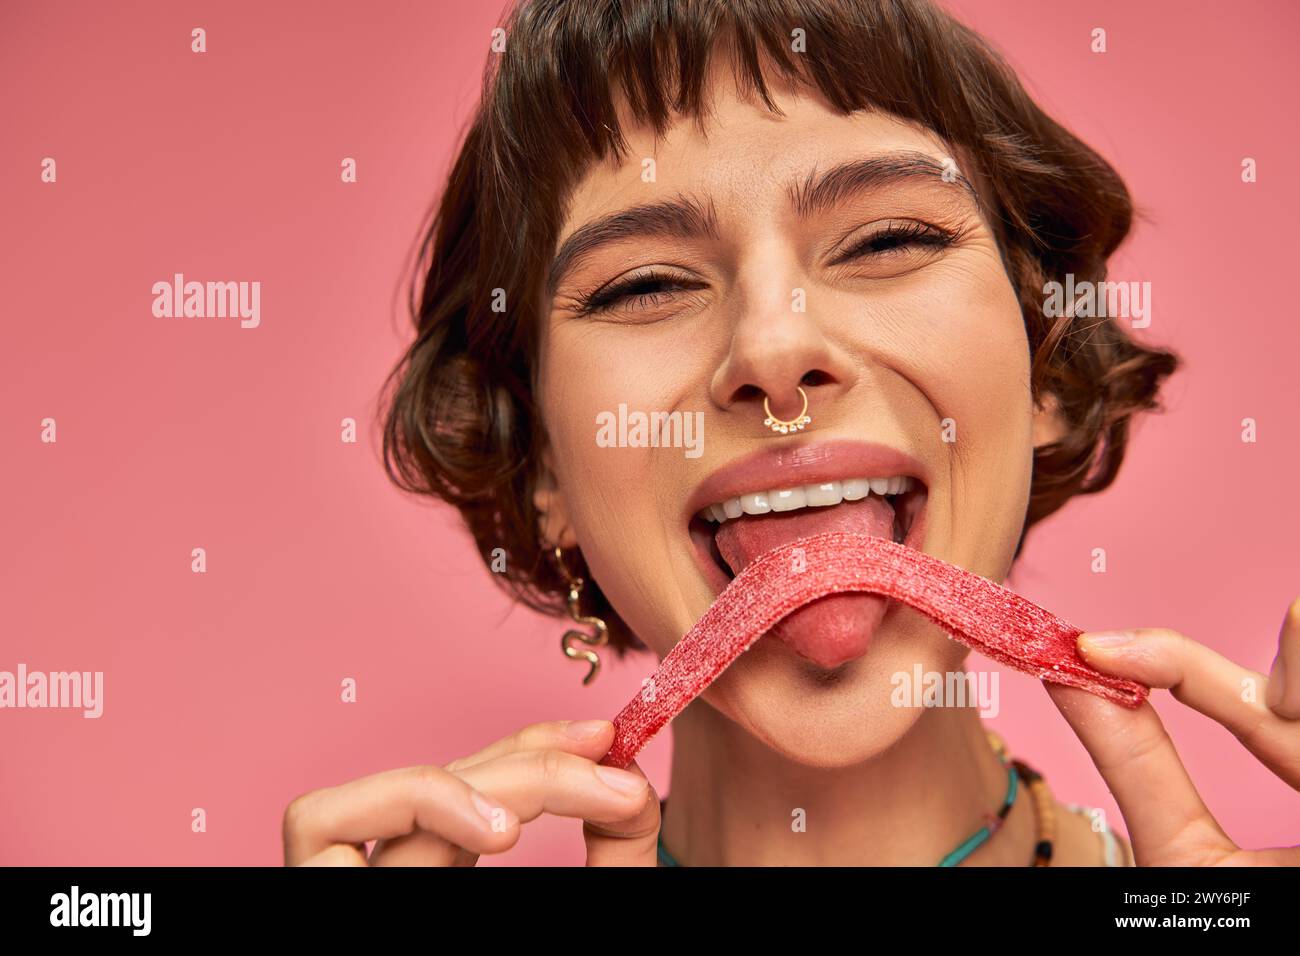 happy and young woman with nose piercing licking sweet and sour candy strip on pink background Stock Photo